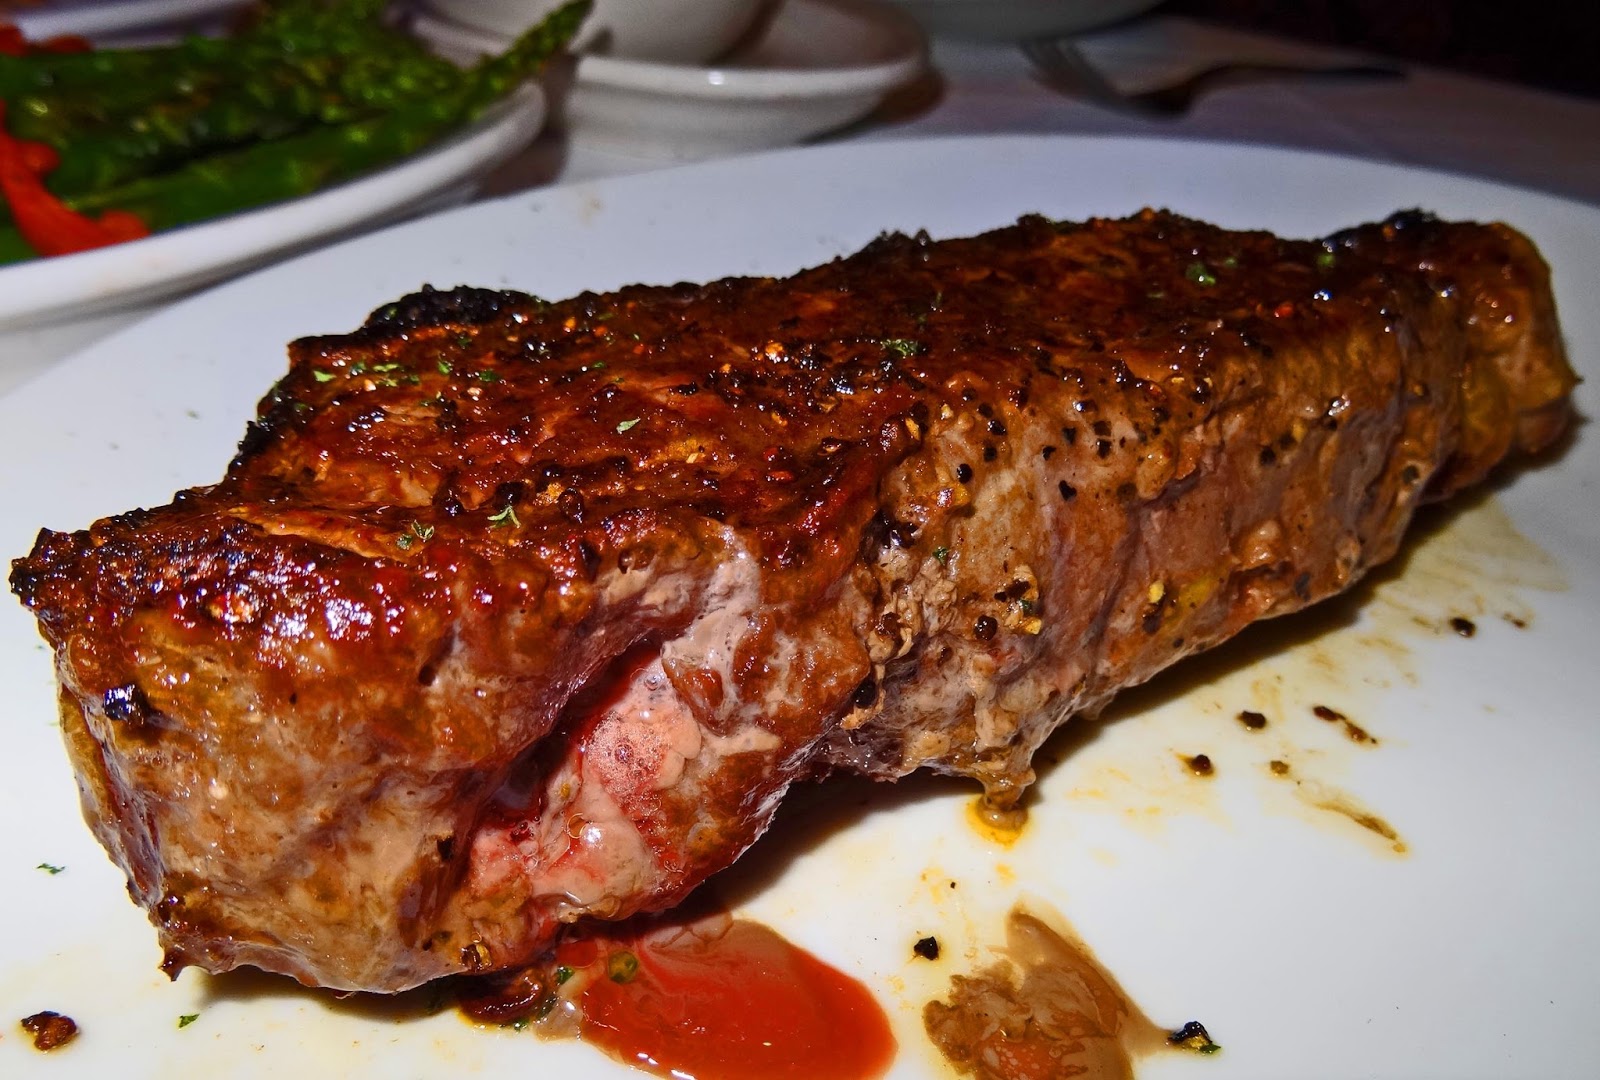 Big, Thick Steakhouse Steaks